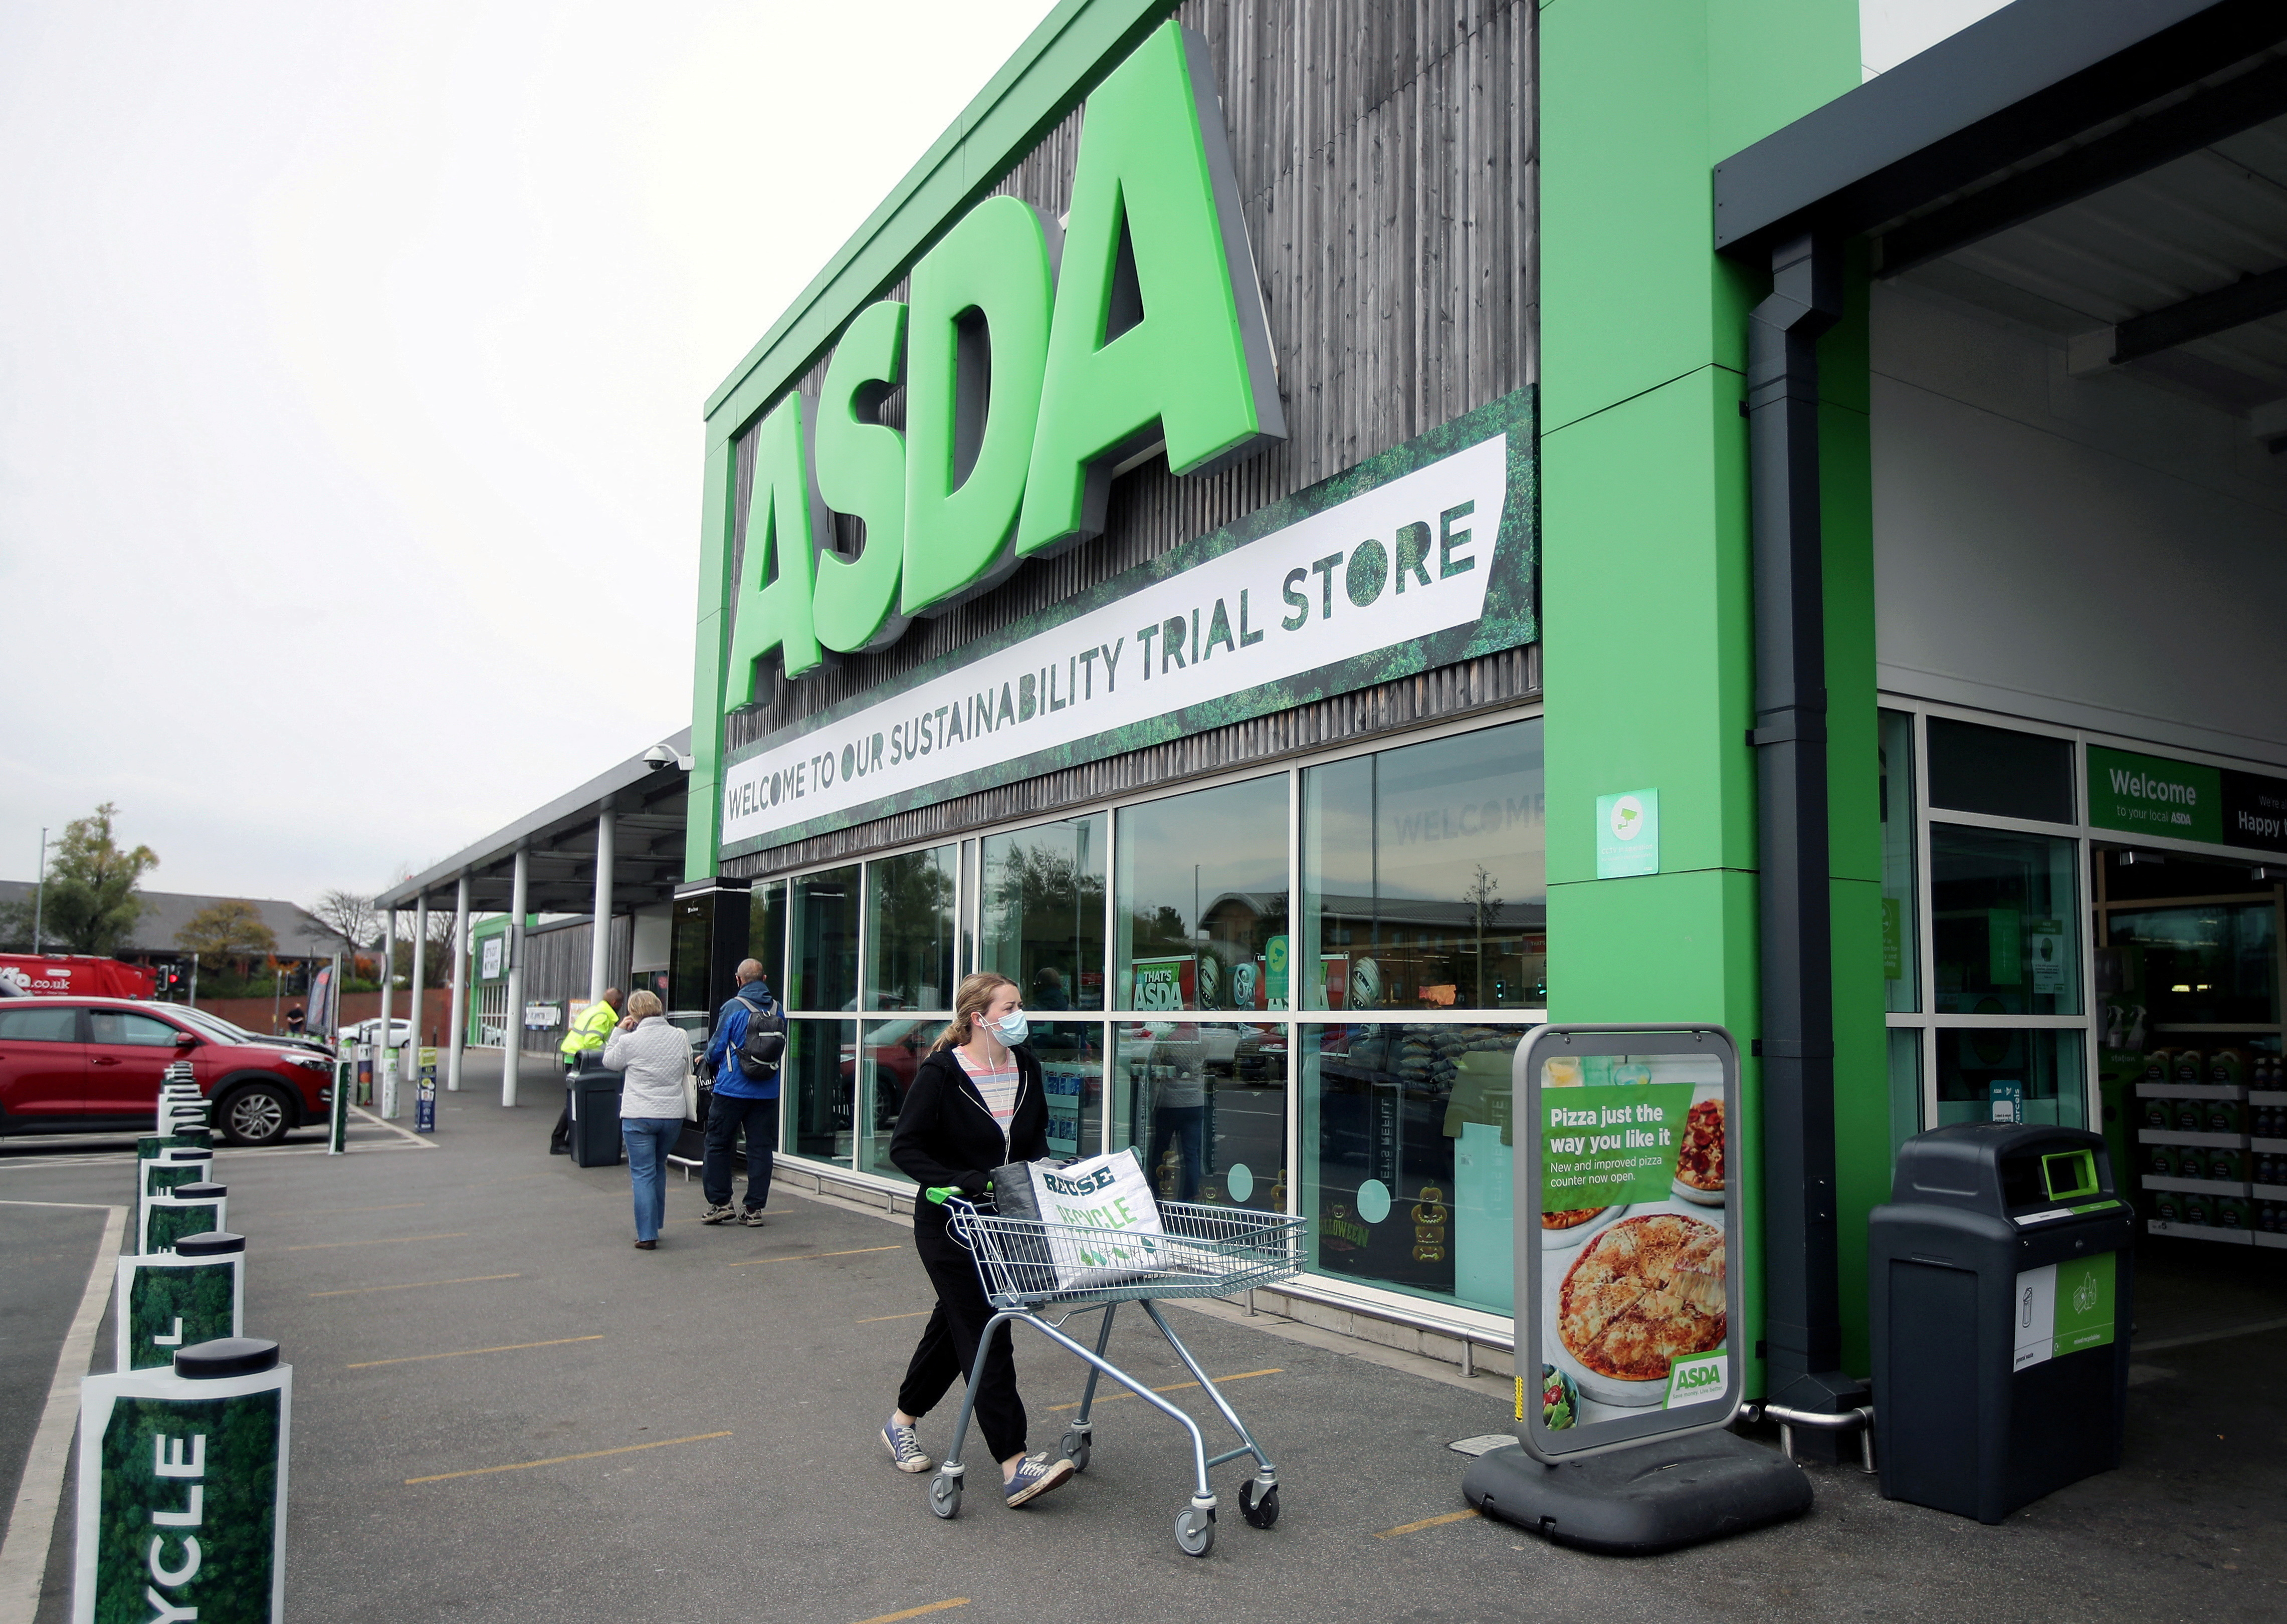 FILE PHOTO: A general view shows the UK supermarket Asda, as the store launches a new sustainability strategy, in Leeds